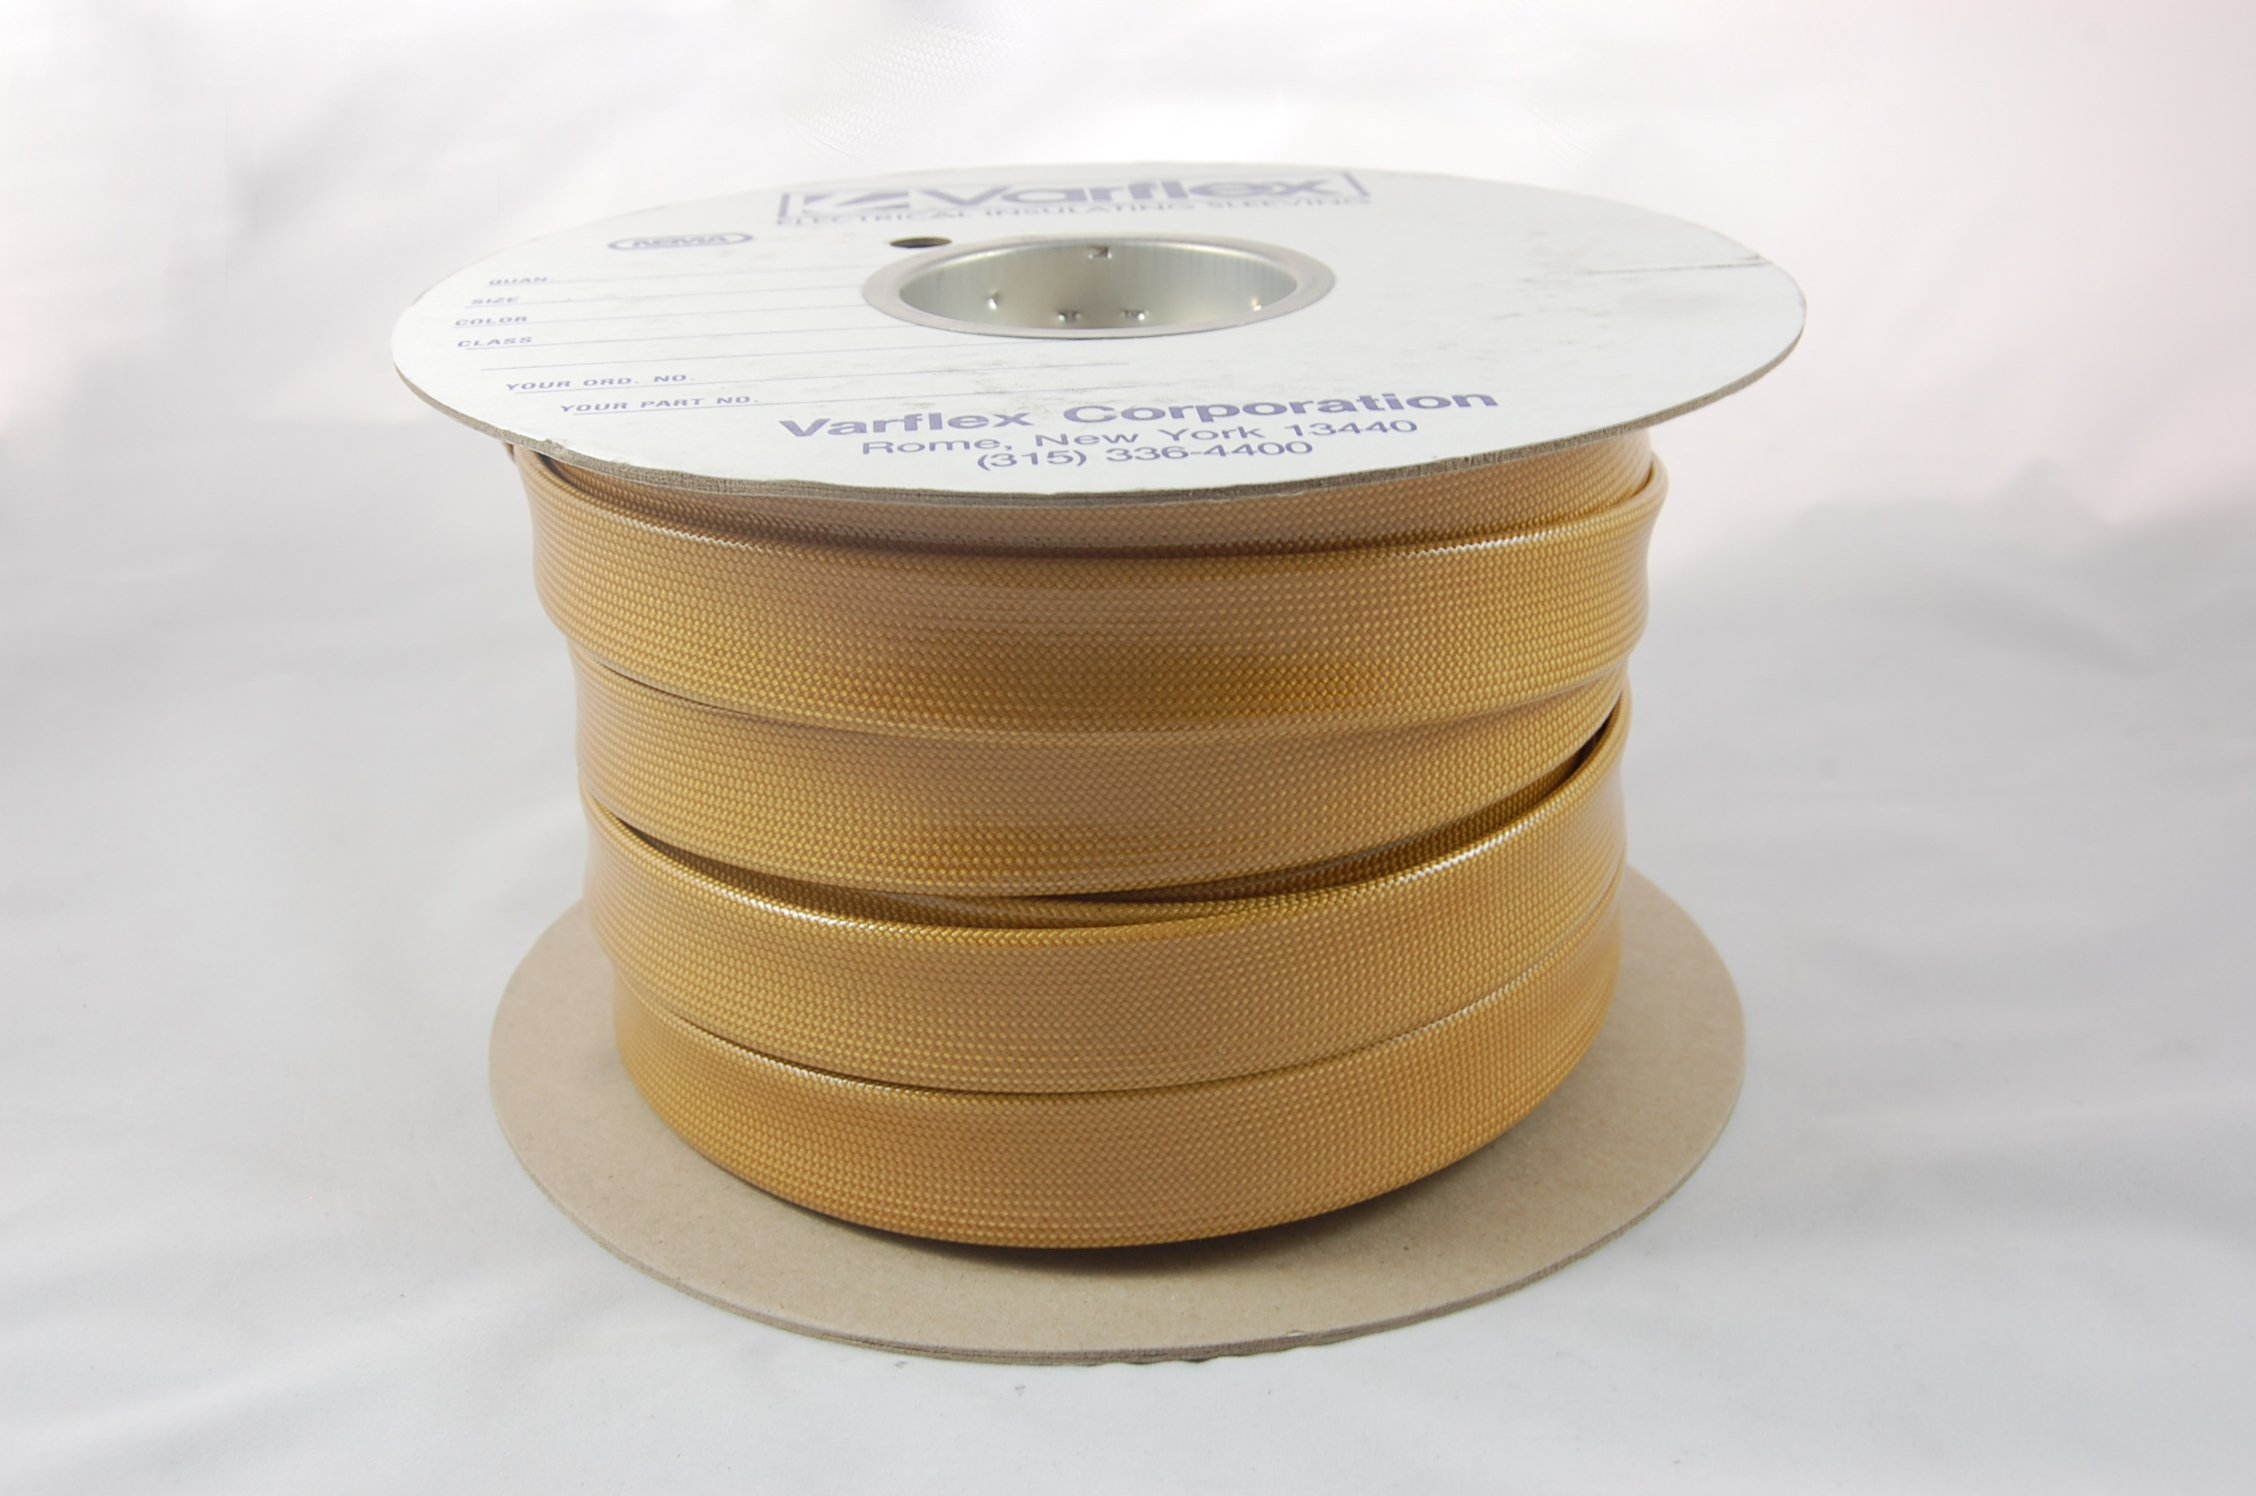 #10 AWG Varglas Silicone Resin 500 Grade H-C-1 (2500V) High Temperature Silicone Resin Coated Braided Fiberglass Sleeving 200°C, natural, 150 FT per spool